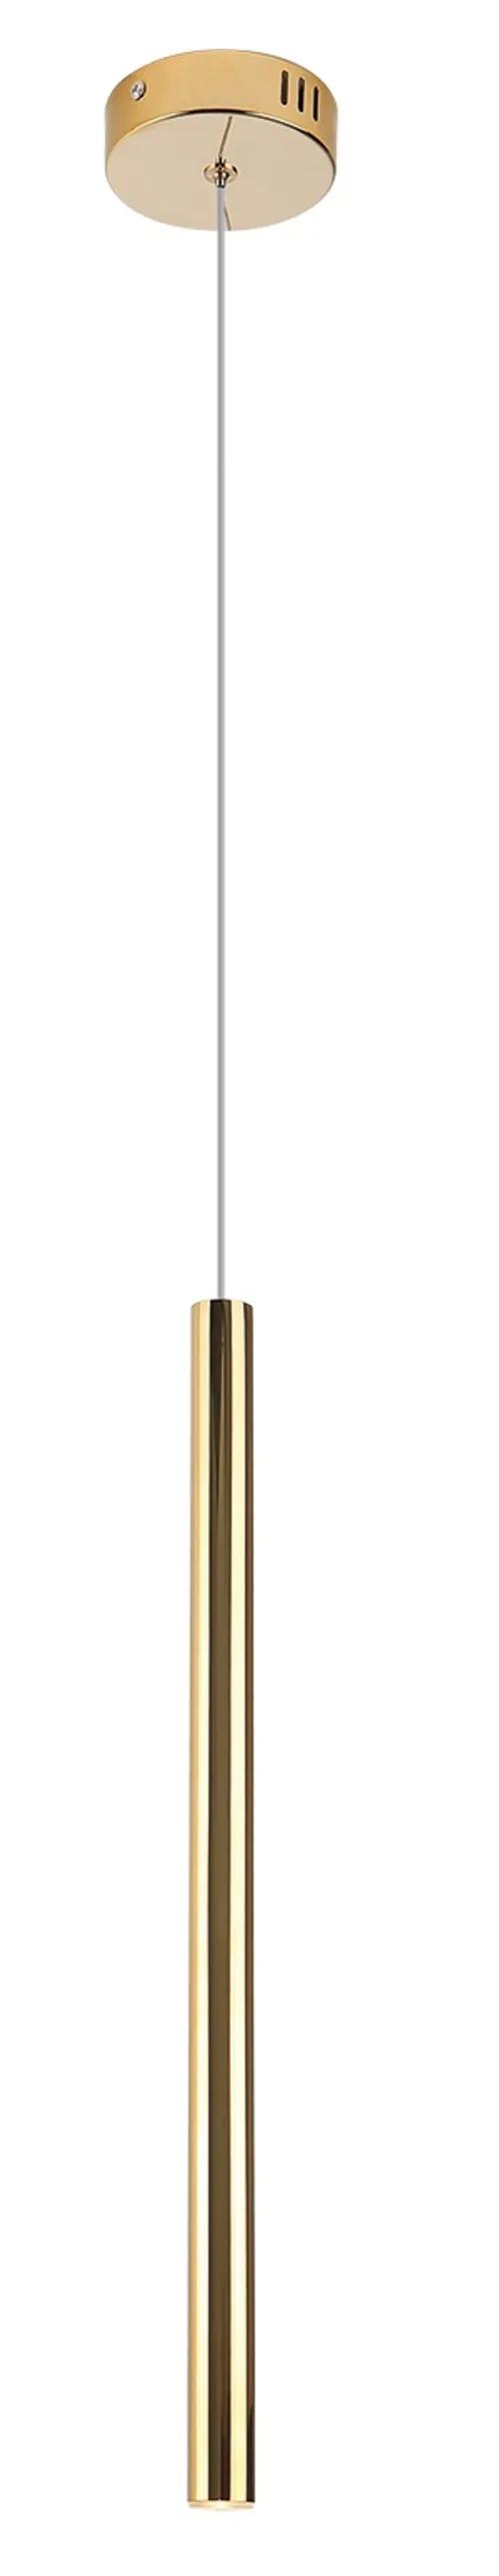 ORGANIC AND GOLD LAMP